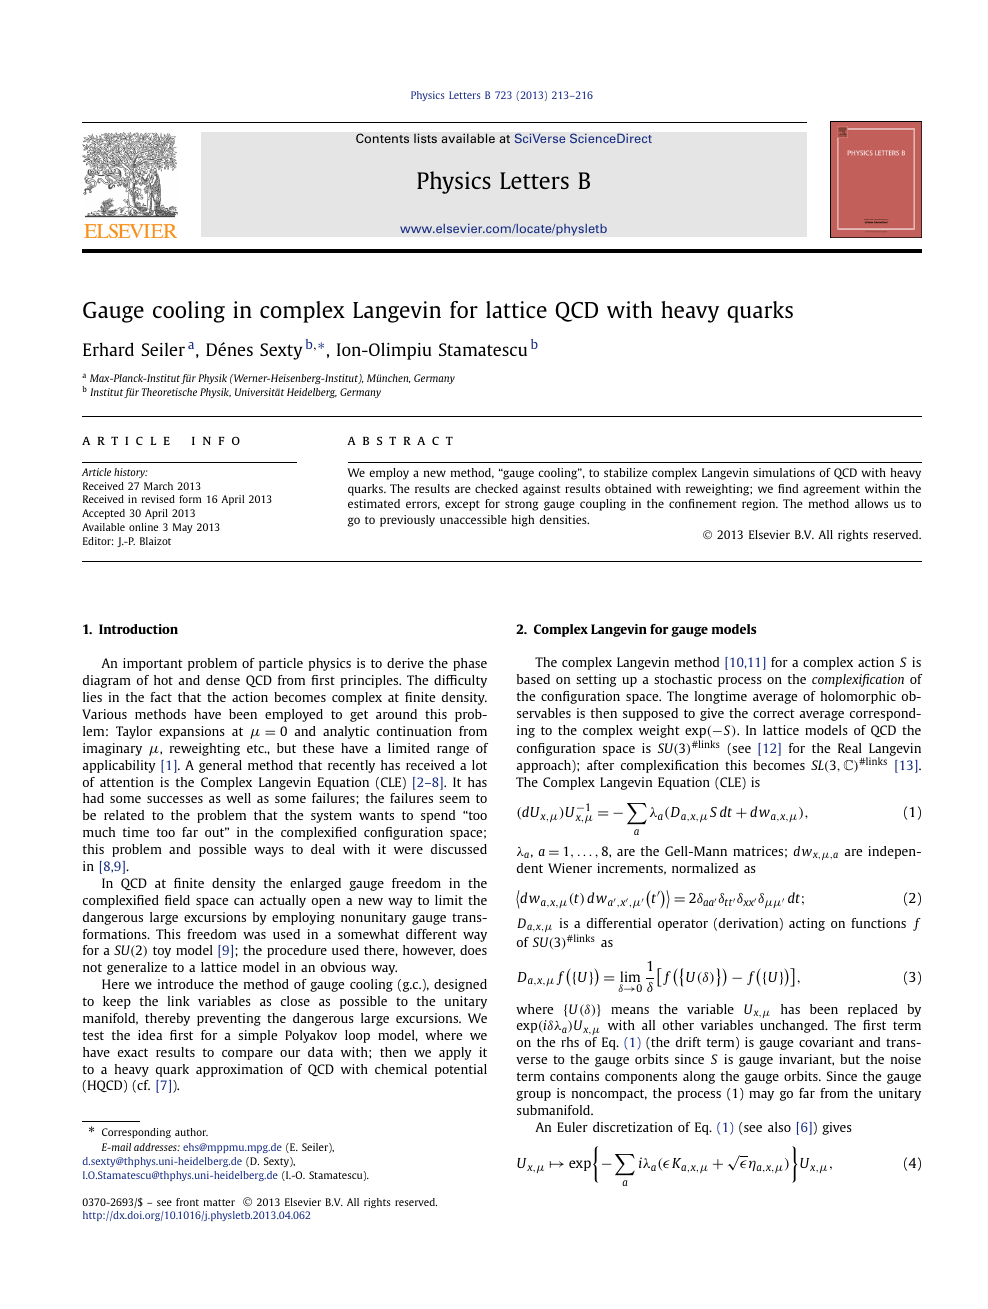 Gauge Cooling In Complex Langevin For Lattice Qcd With Heavy Quarks Topic Of Research Paper In Physical Sciences Download Scholarly Article Pdf And Read For Free On Cyberleninka Open Science Hub